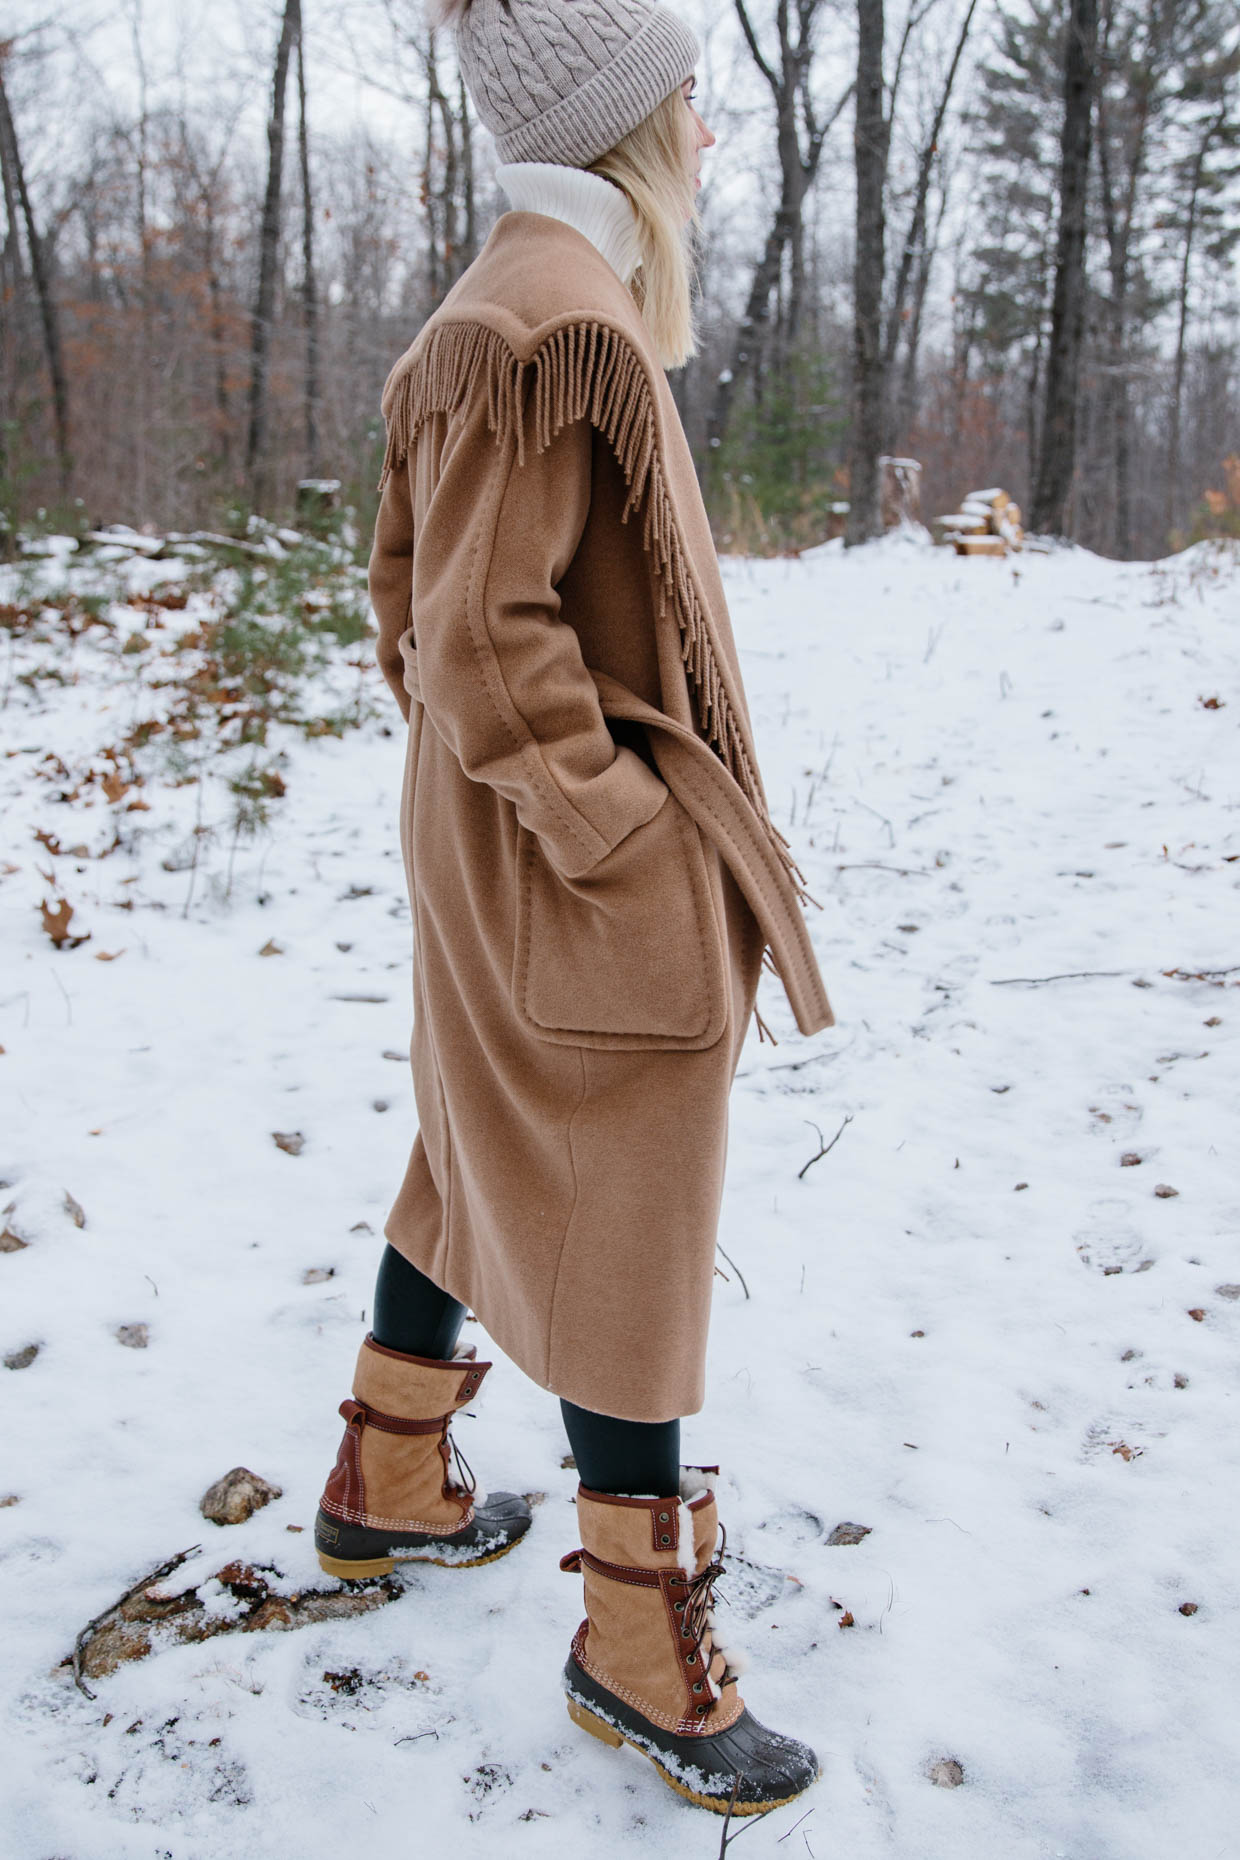 Snow Day in the Woods: Fringe Coat with Faux Leather Leggings & Sherpa  Boots - Meagan's Moda